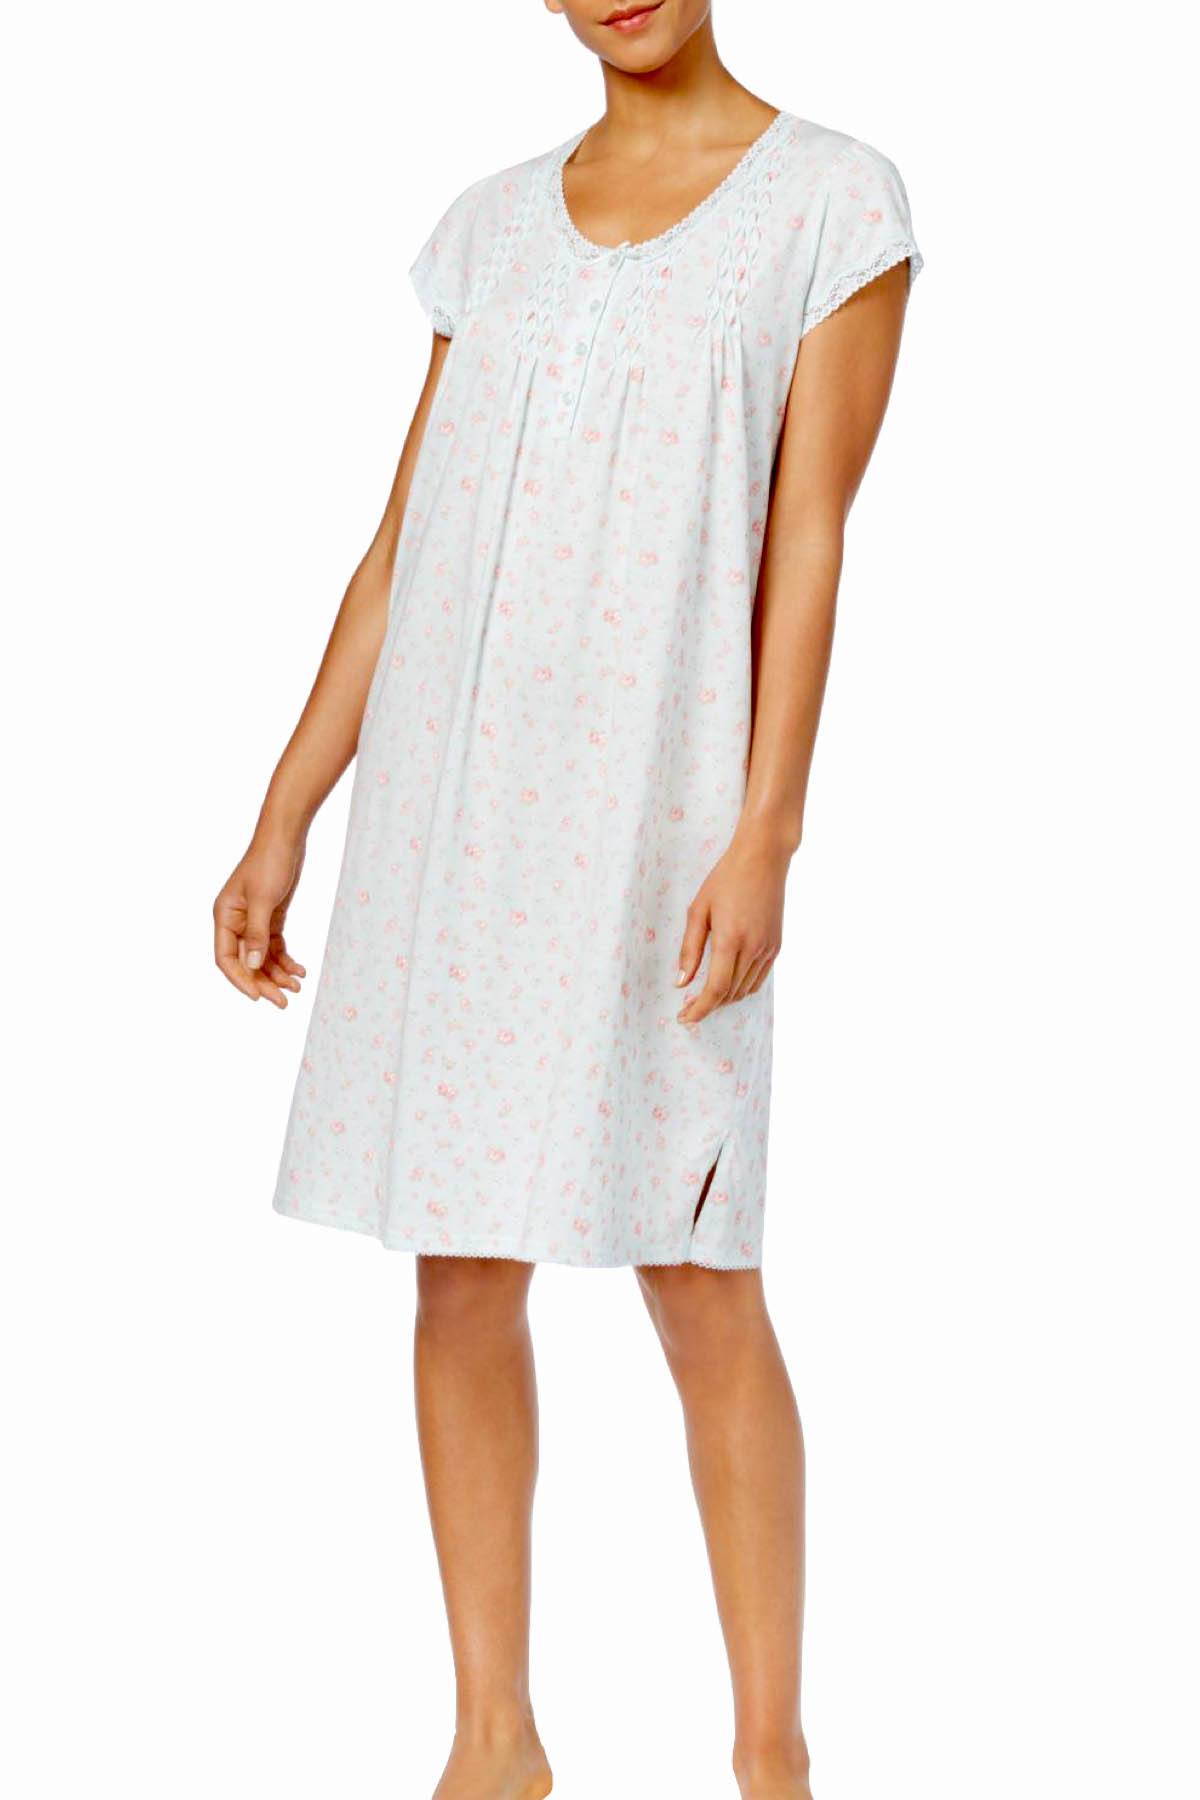 Miss Elaine Blue/Pink-Floral Smocking-Trimmed Knit Printed Nightgown